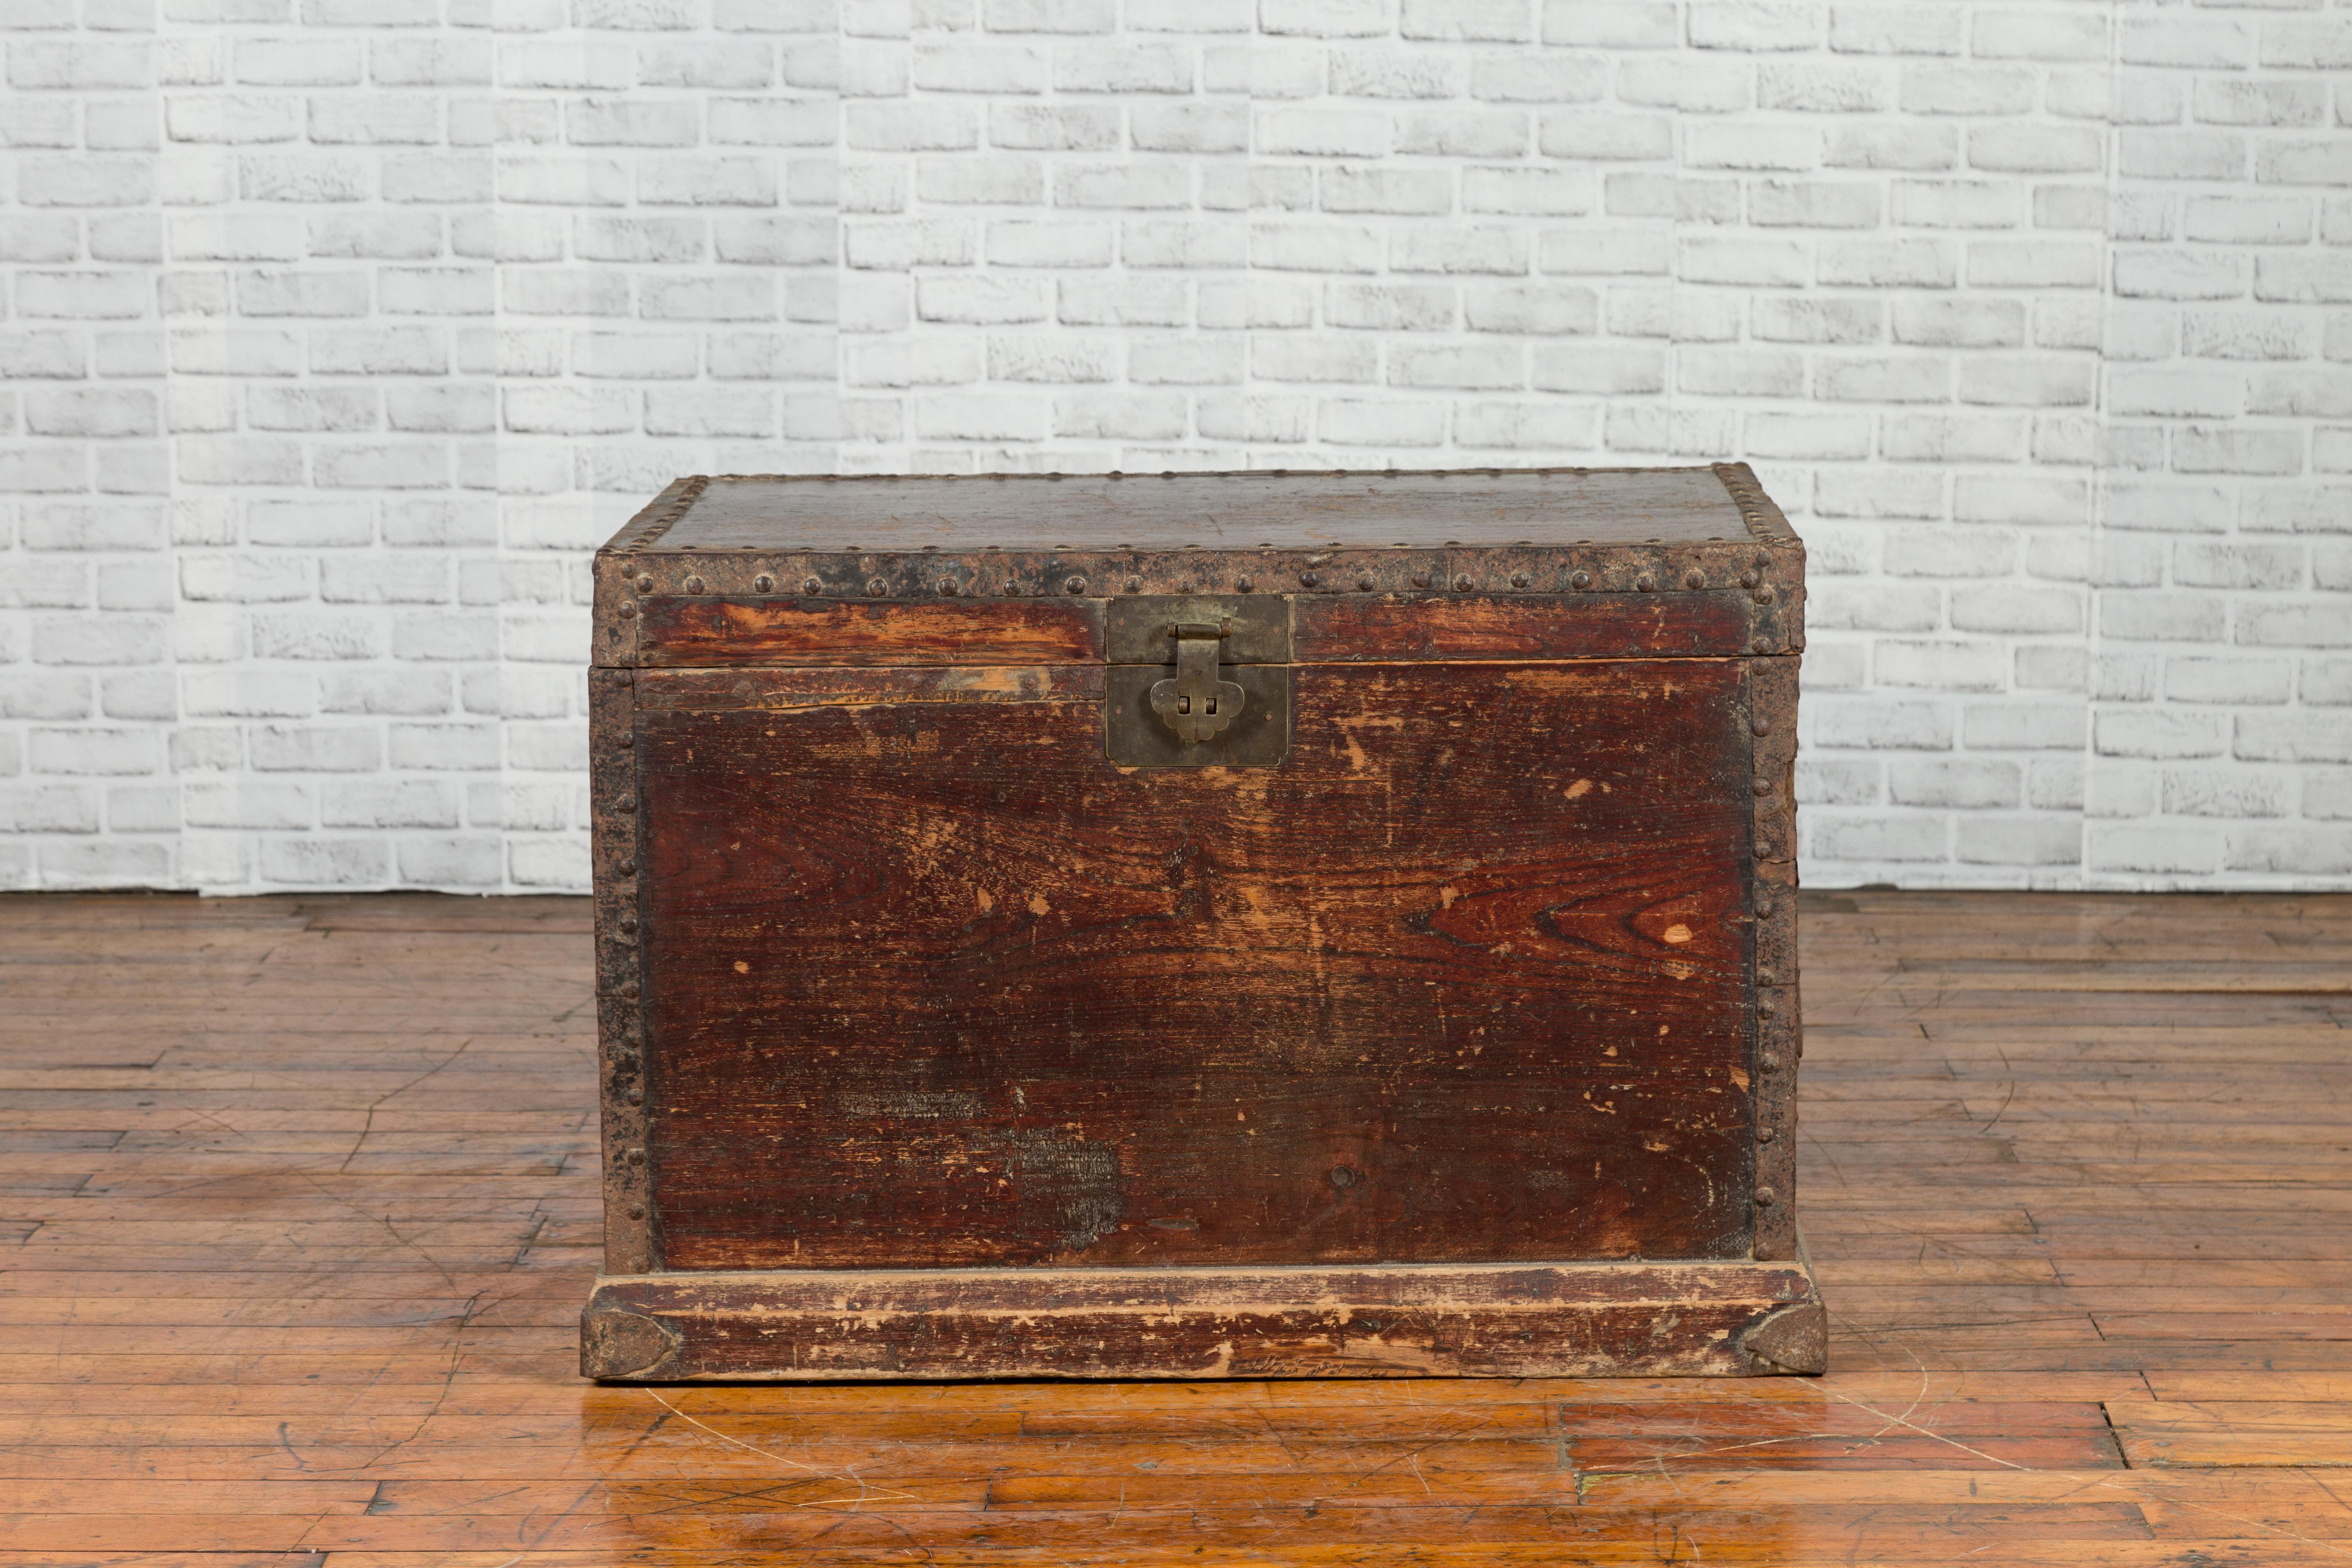 Chinese Qing Dynasty 19th Century Distressed Blanket Chest with Iron Fittings For Sale 1